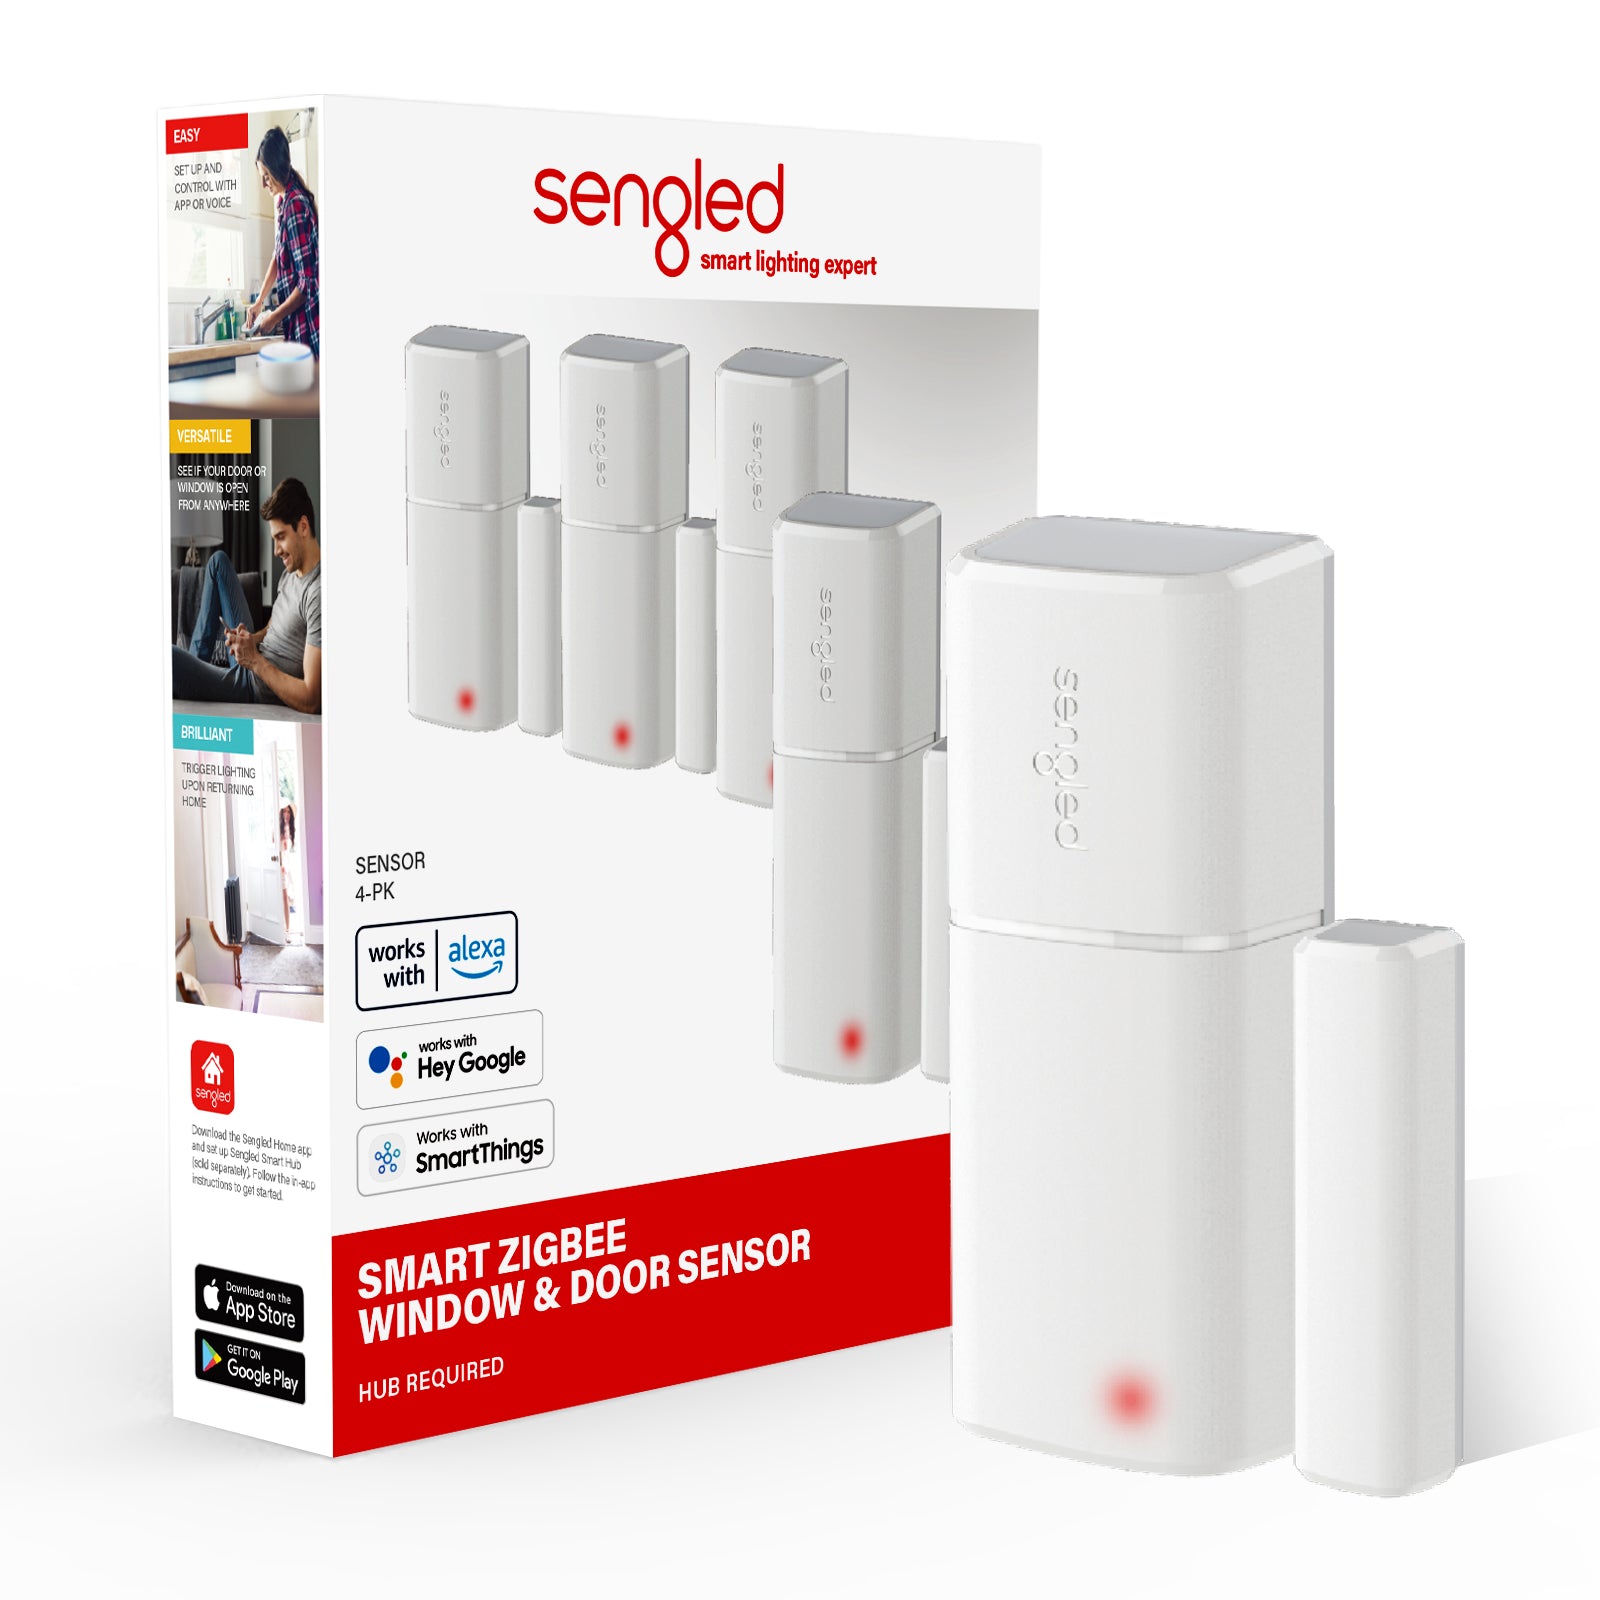 Customizable Control: Control and customize the Sengled Door & Window Sensor G2 through the Sengled Home App. Adjust settings, receive notifications, and tailor the sensor's behavior to suit your specific needs.